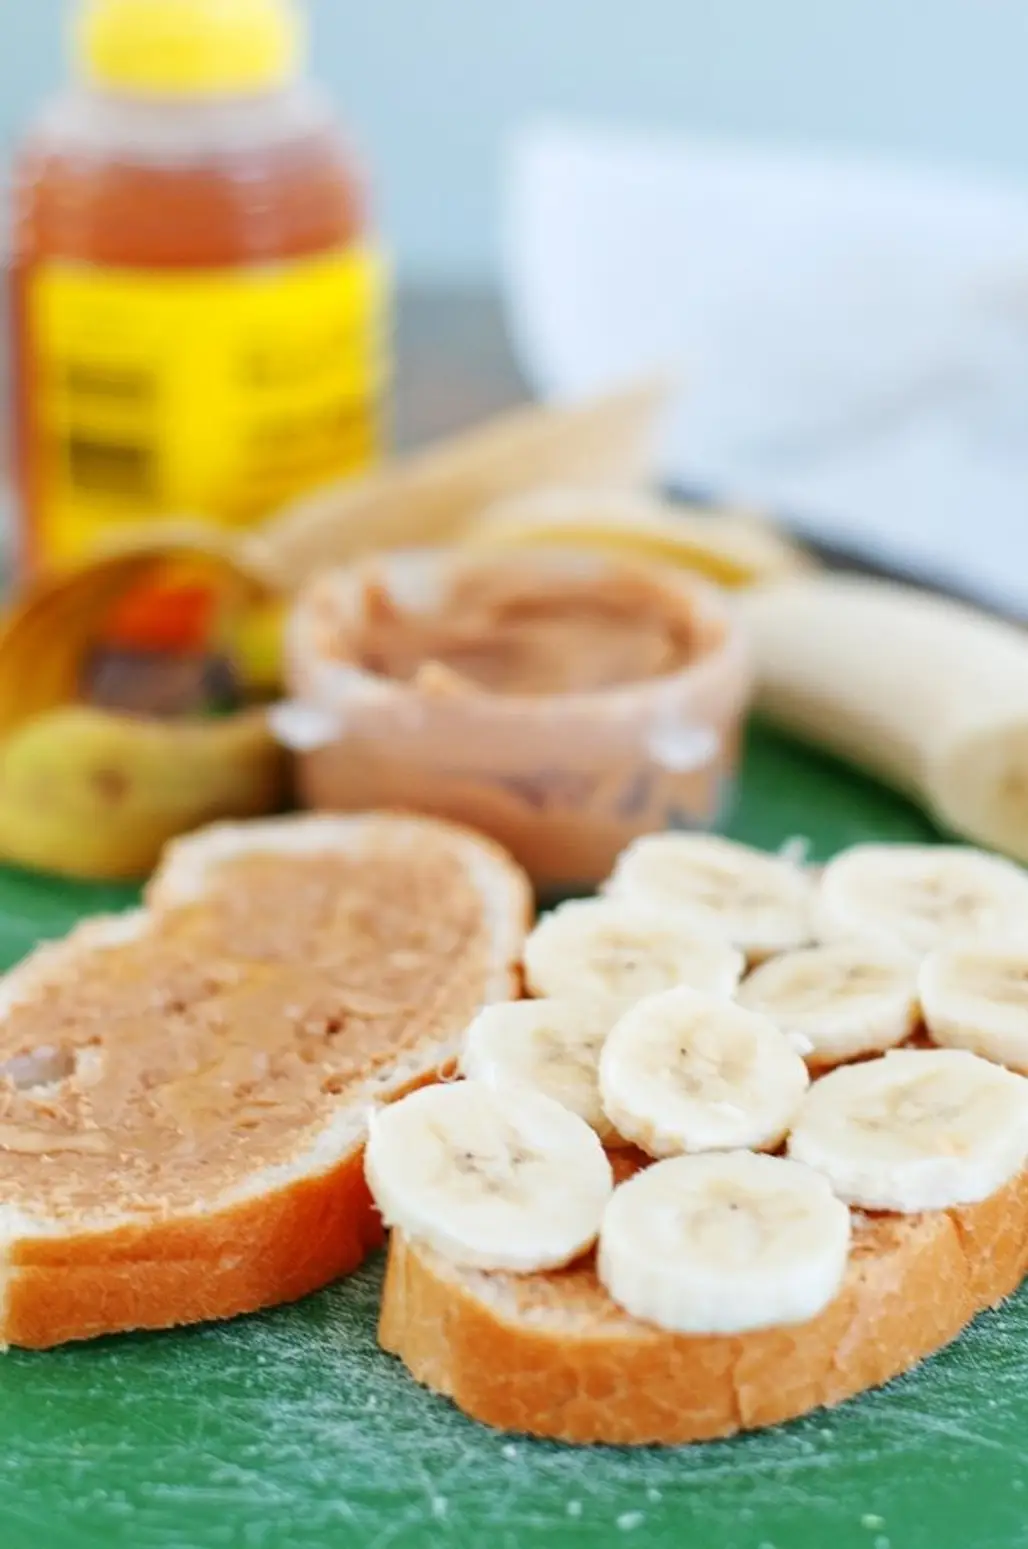 Banana with Nut Butter